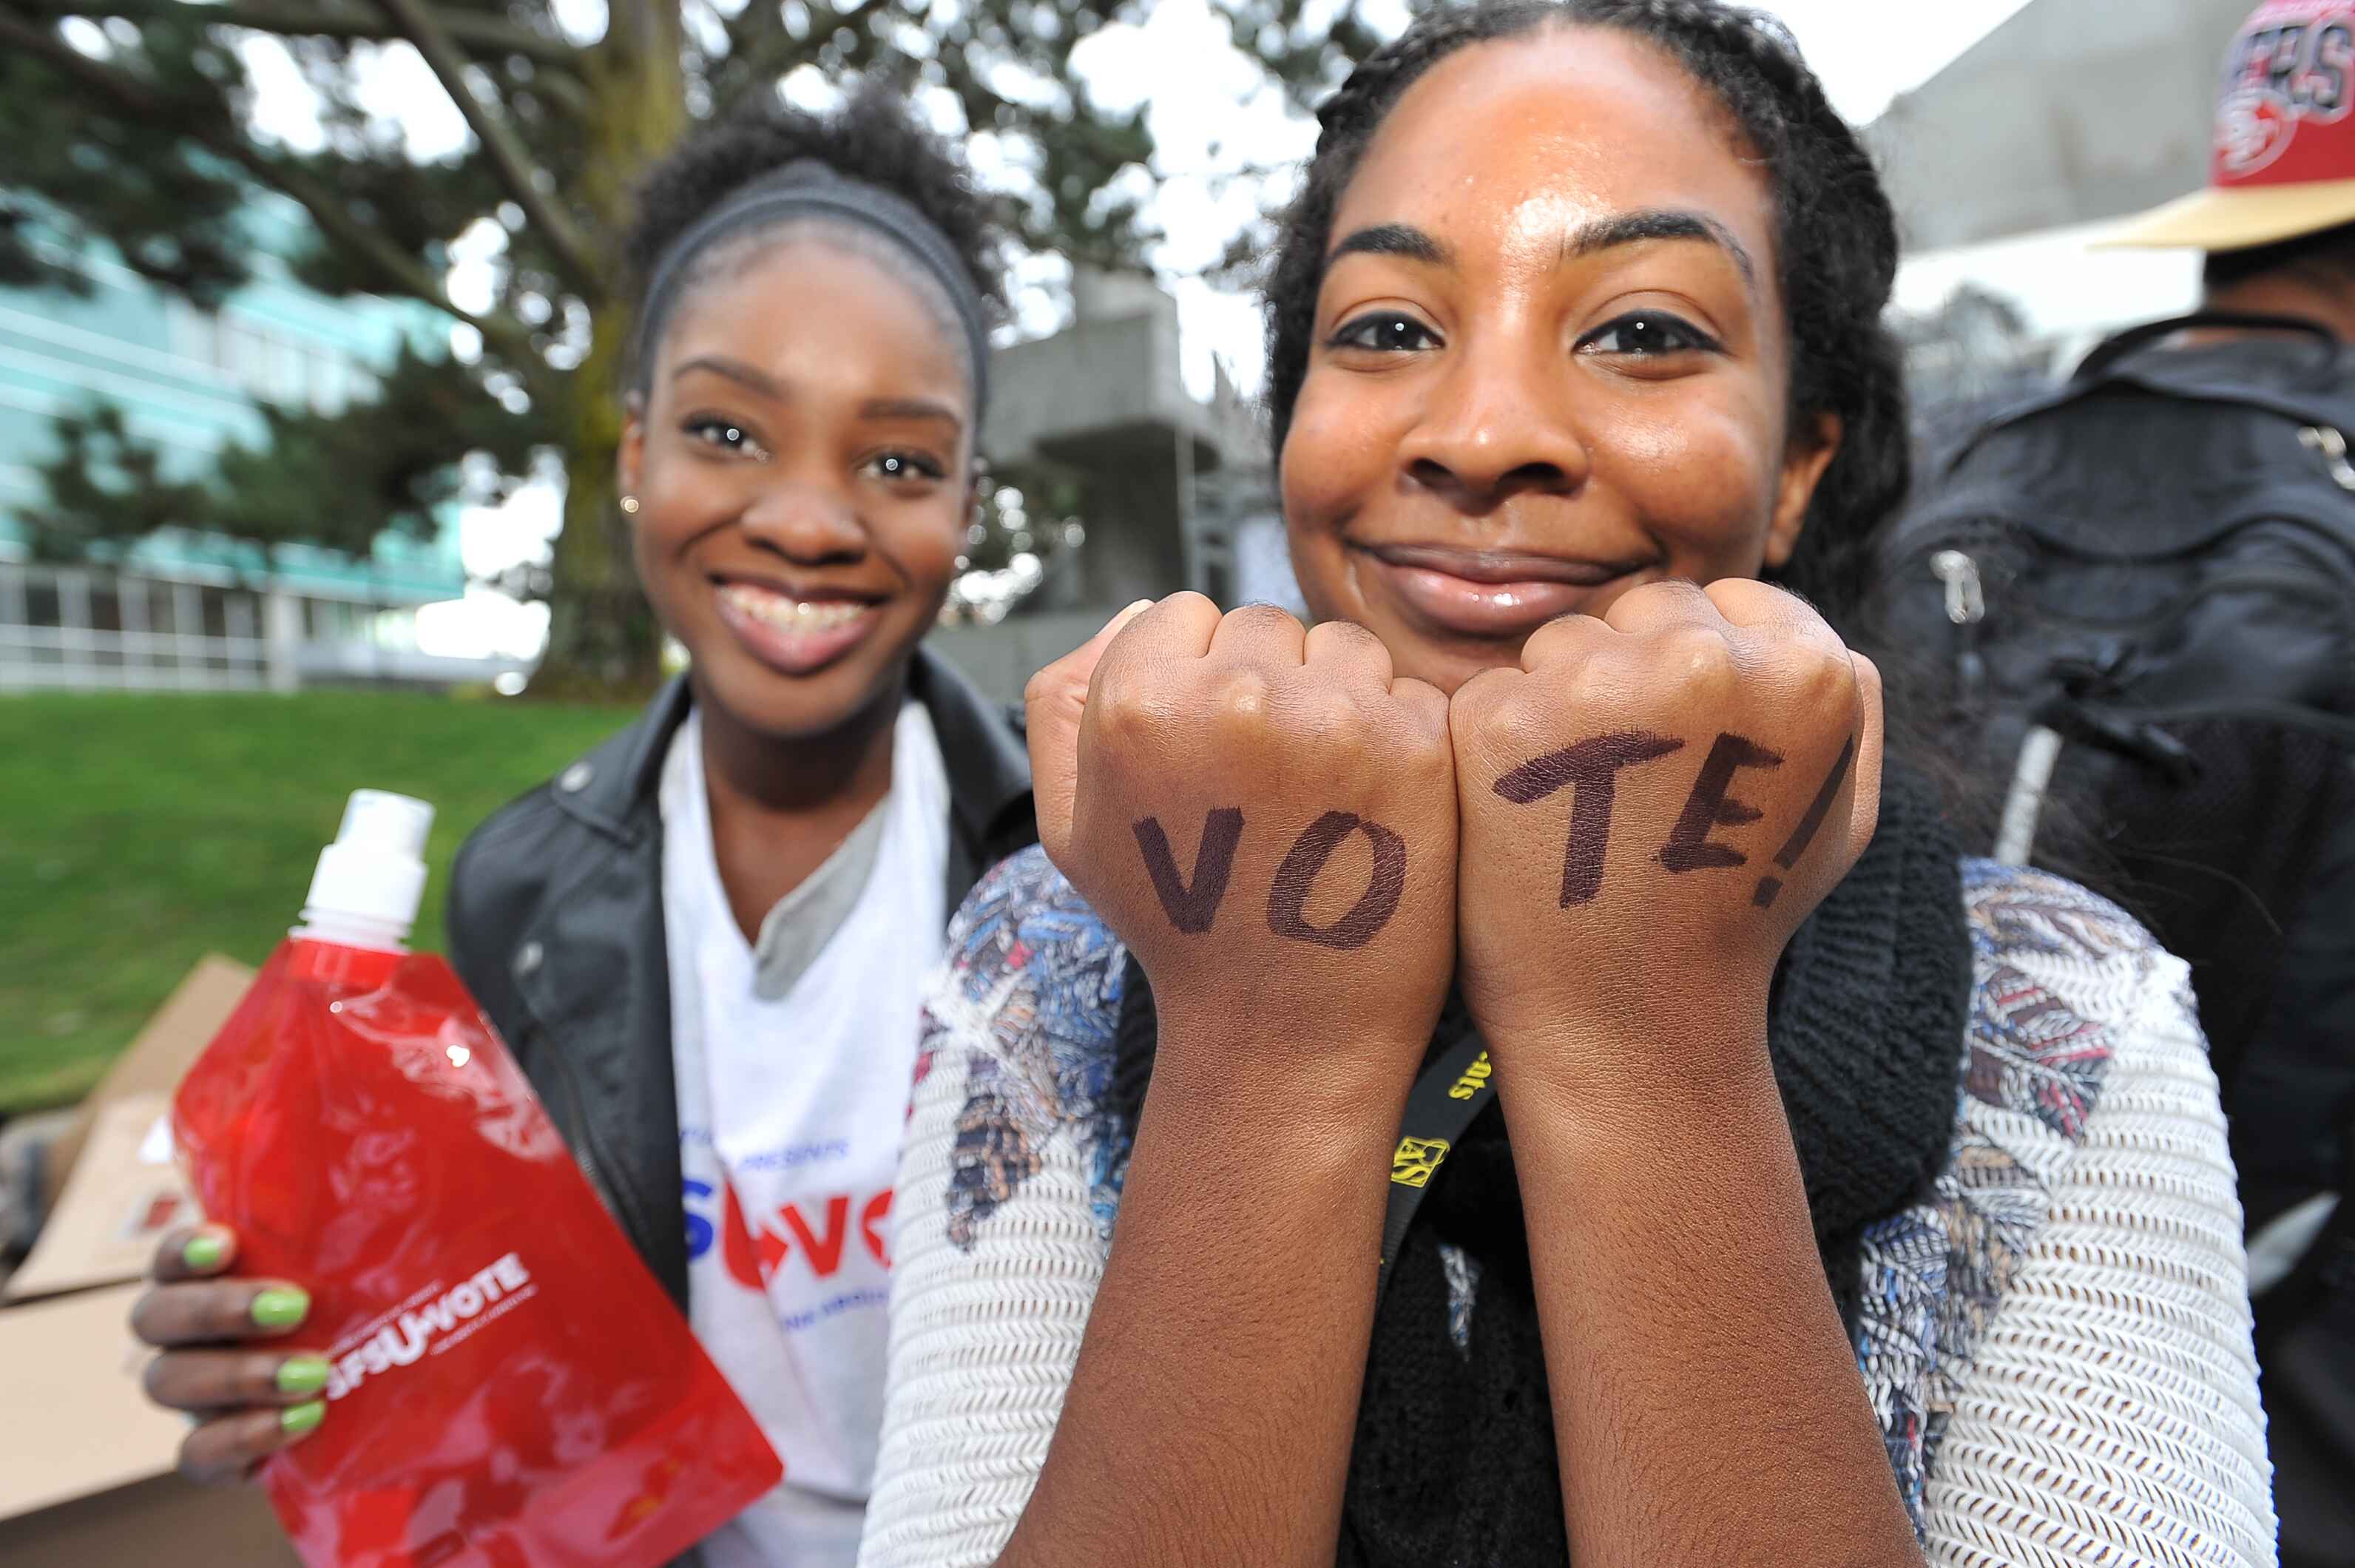 Student with Vote written on hands